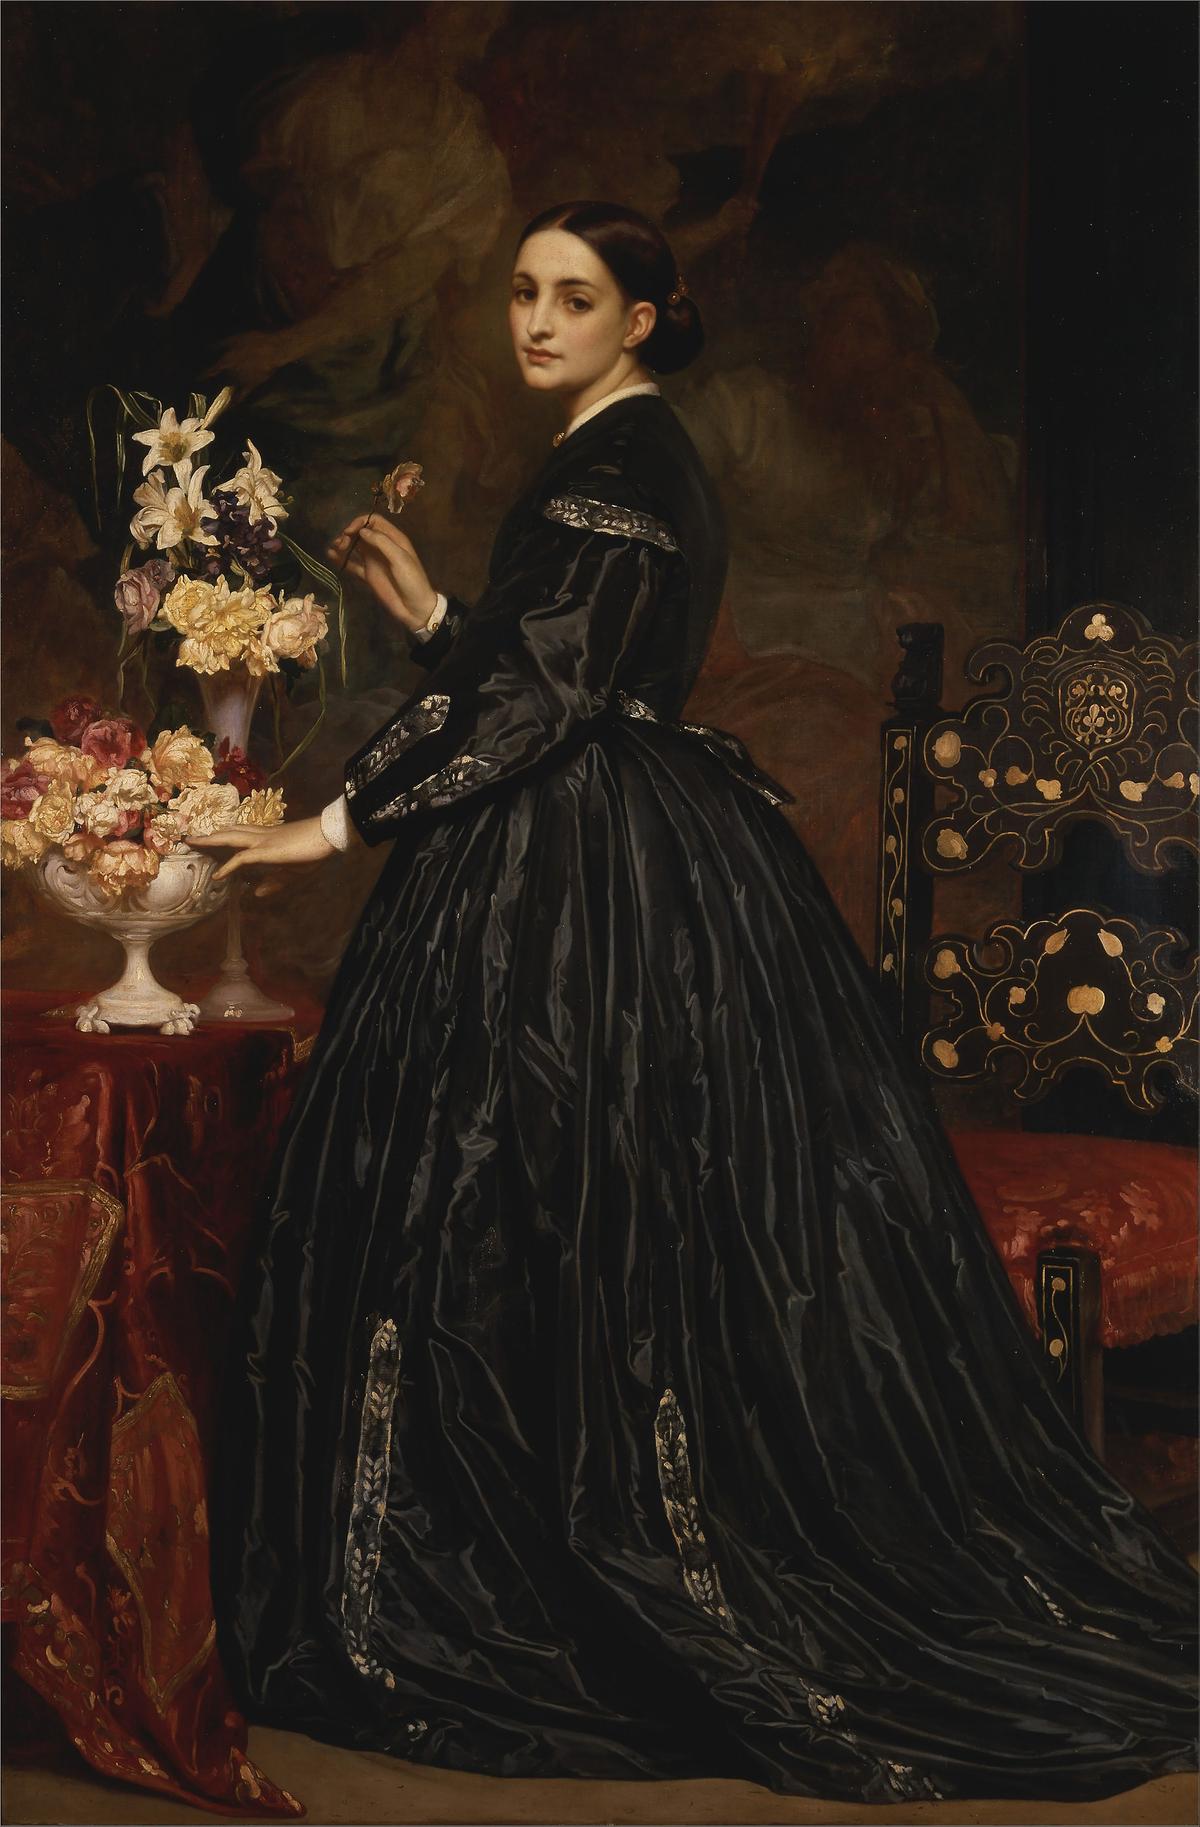 When we suffer loss, the beauty of art may console us. “Mrs. James Guthrie,” circa 1864 to 1865, by Sir Frederic Leighton. Oil on canvas; 83 inches by 54.5 inches. Yale Center for British Art, in New Haven, Connecticut. (PD-US)